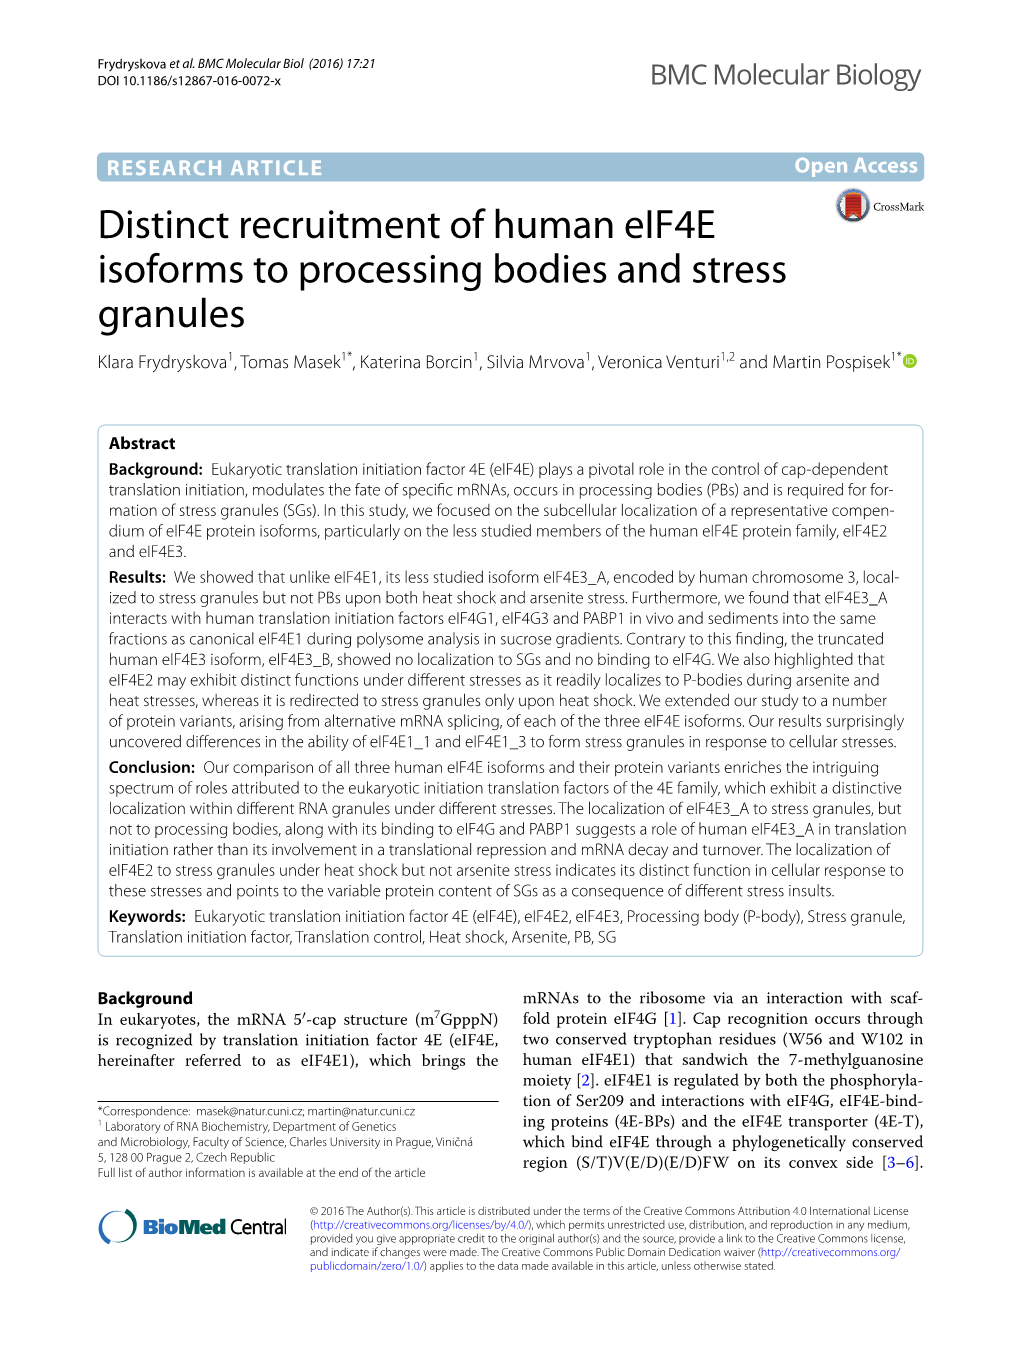 Distinct Recruitment of Human Eif4e Isoforms to Processing Bodies And